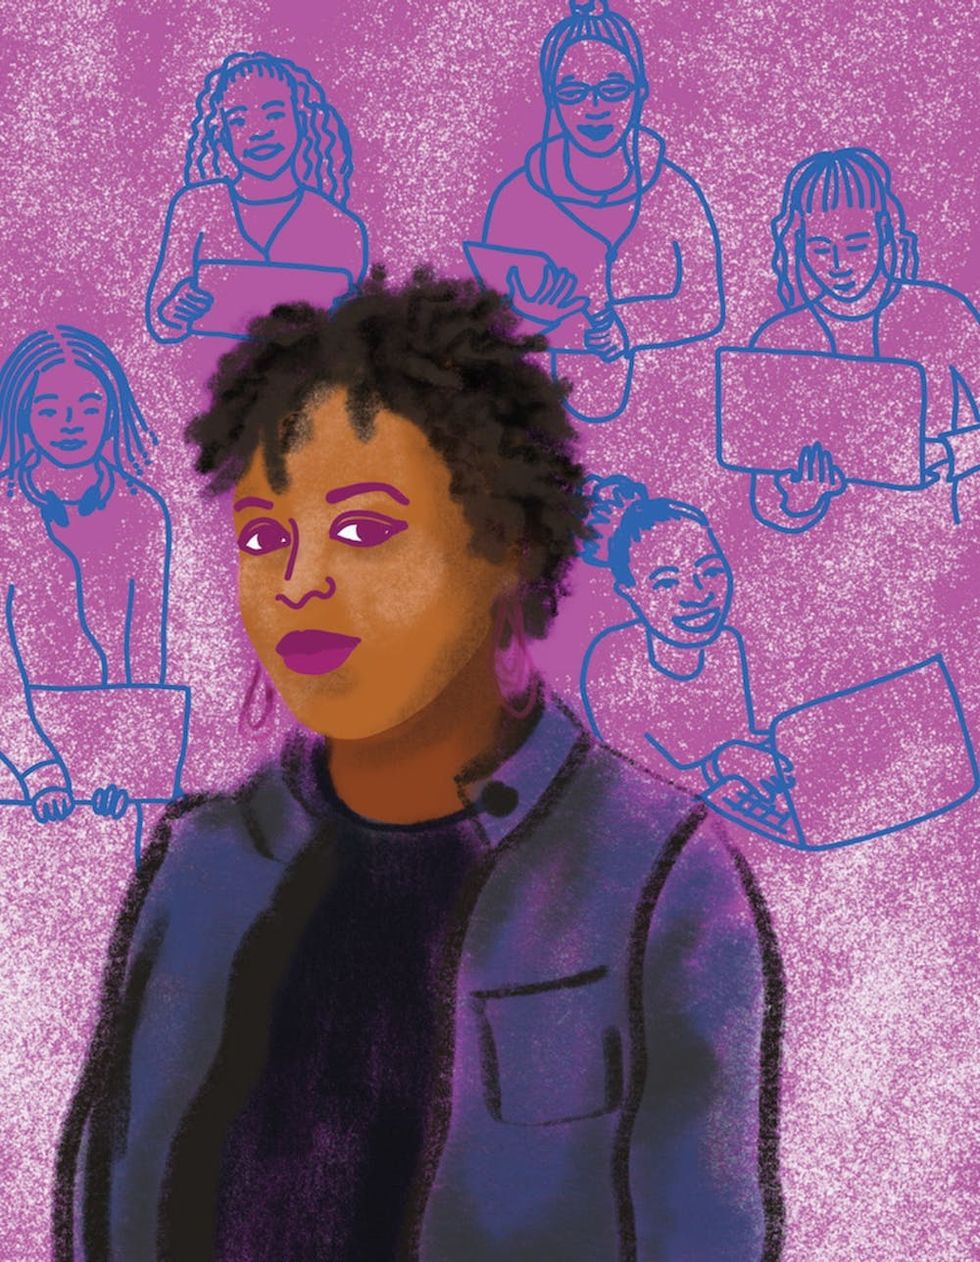 Illustration of Kimberly Bryant from Girl CEO